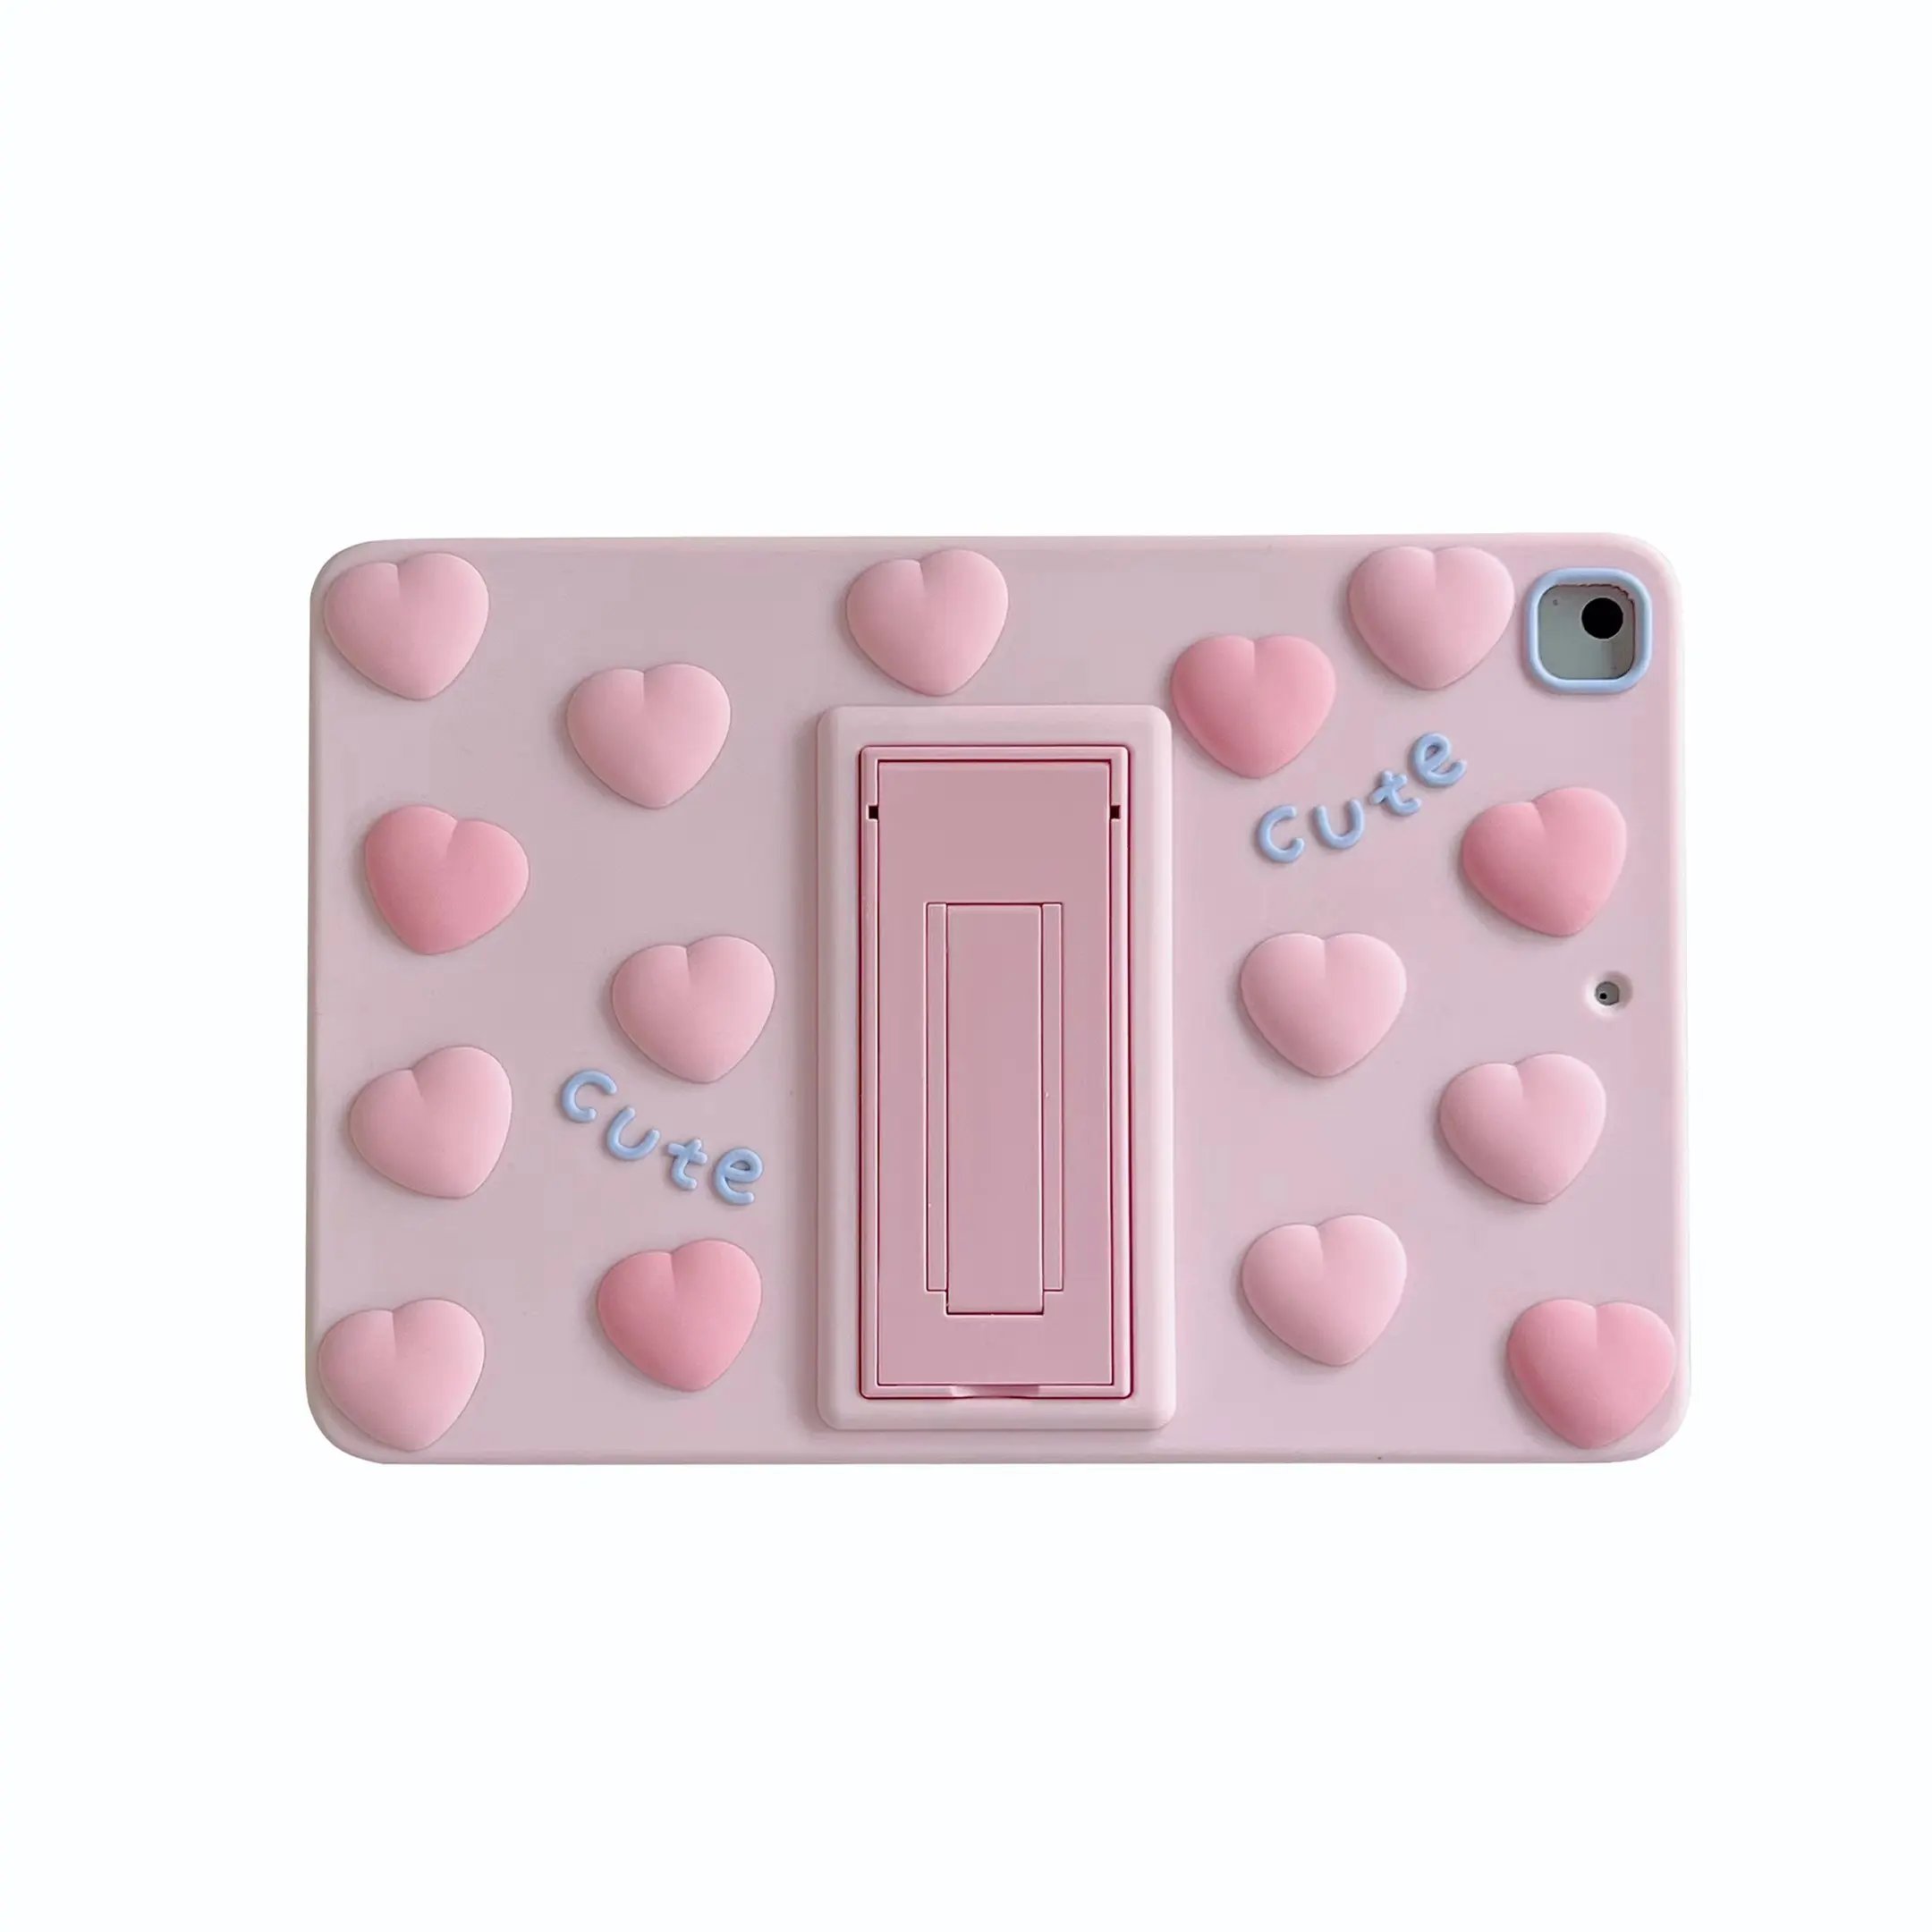 3D Cute Pink Love Heart Kickstand Bracket Tablet Case for iPad Mini 1 2 3 4 5 6 Soft Rubber Silicone Protective Cover